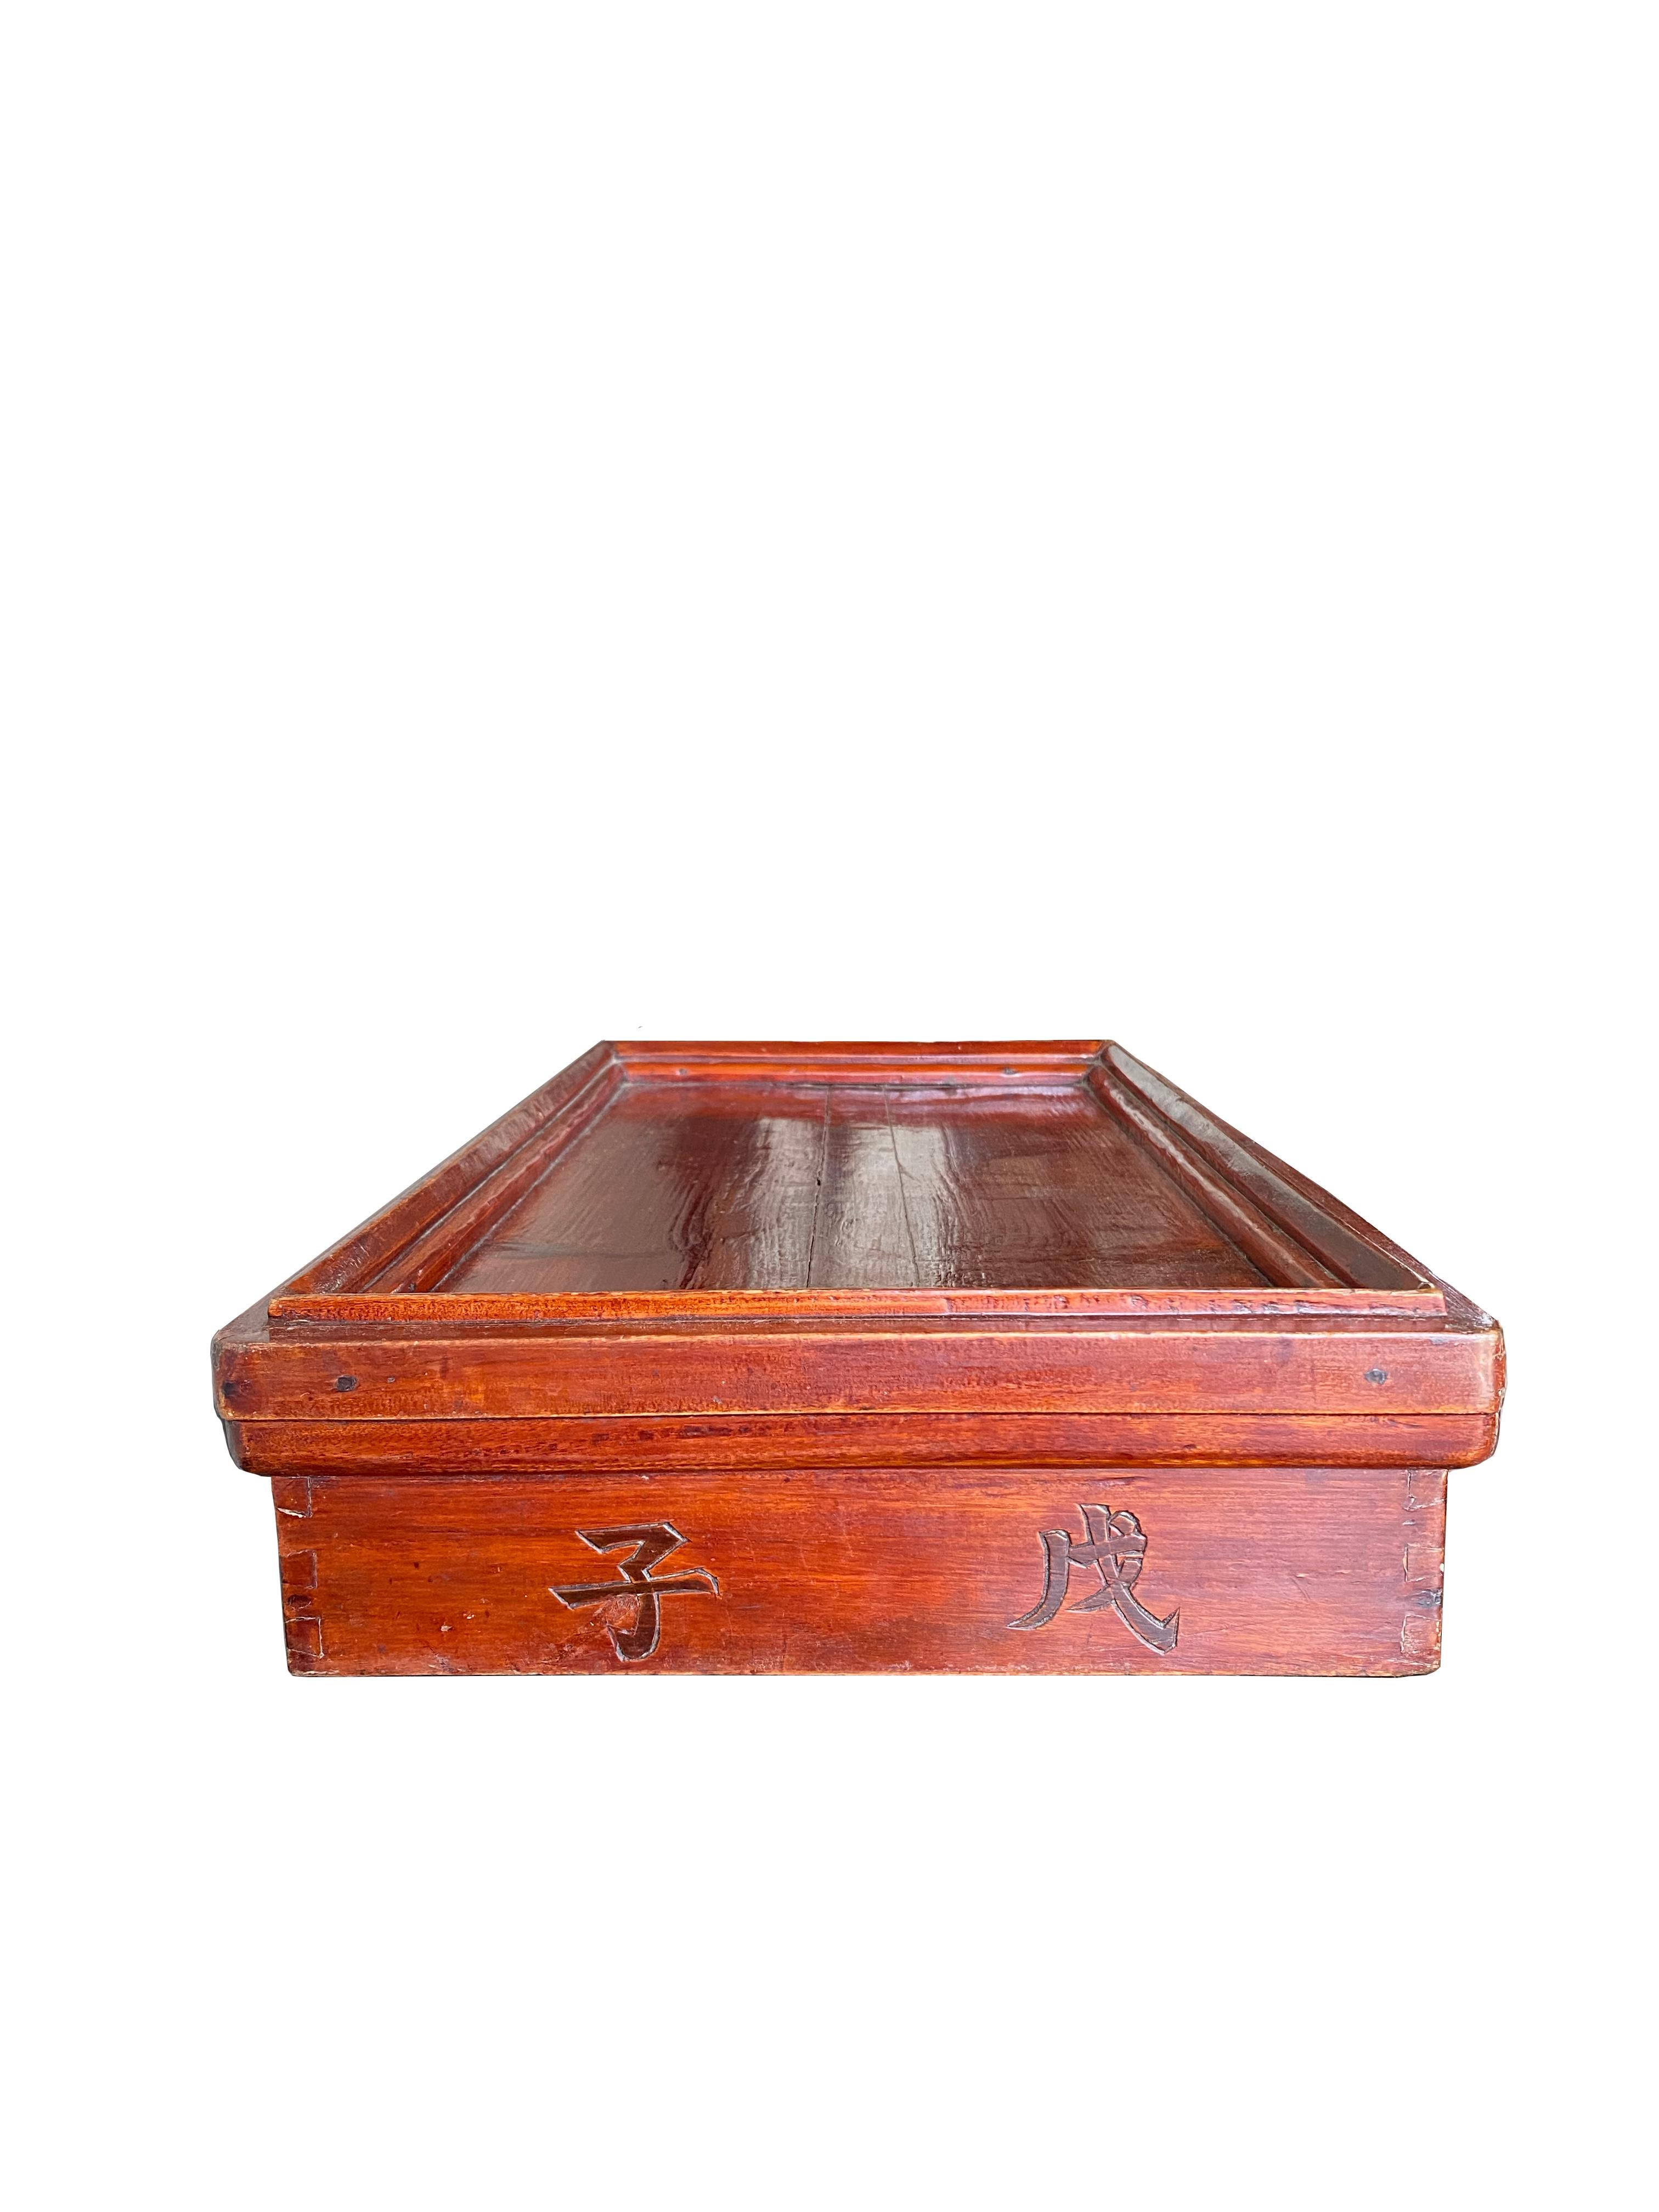 Hand-Crafted Chinese Burgundy Lacquered Tray with Character Engravings, Mid-20th Century For Sale